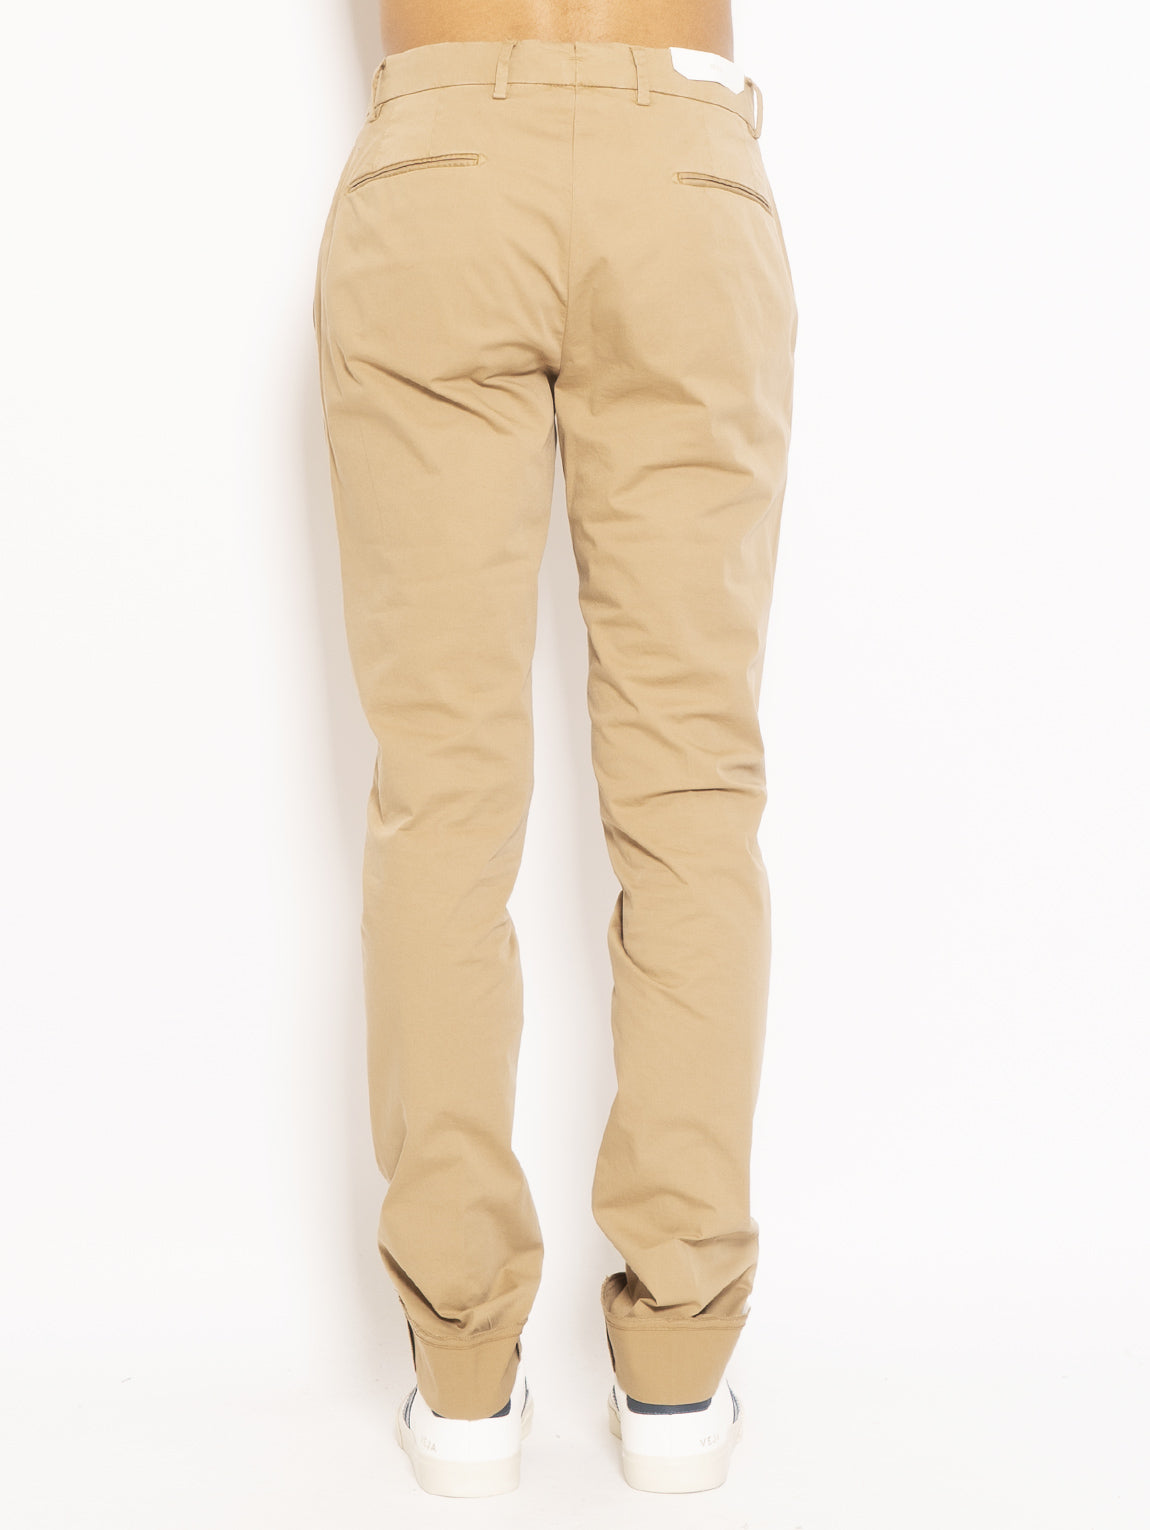 Five Pocket Beige Chino Trousers